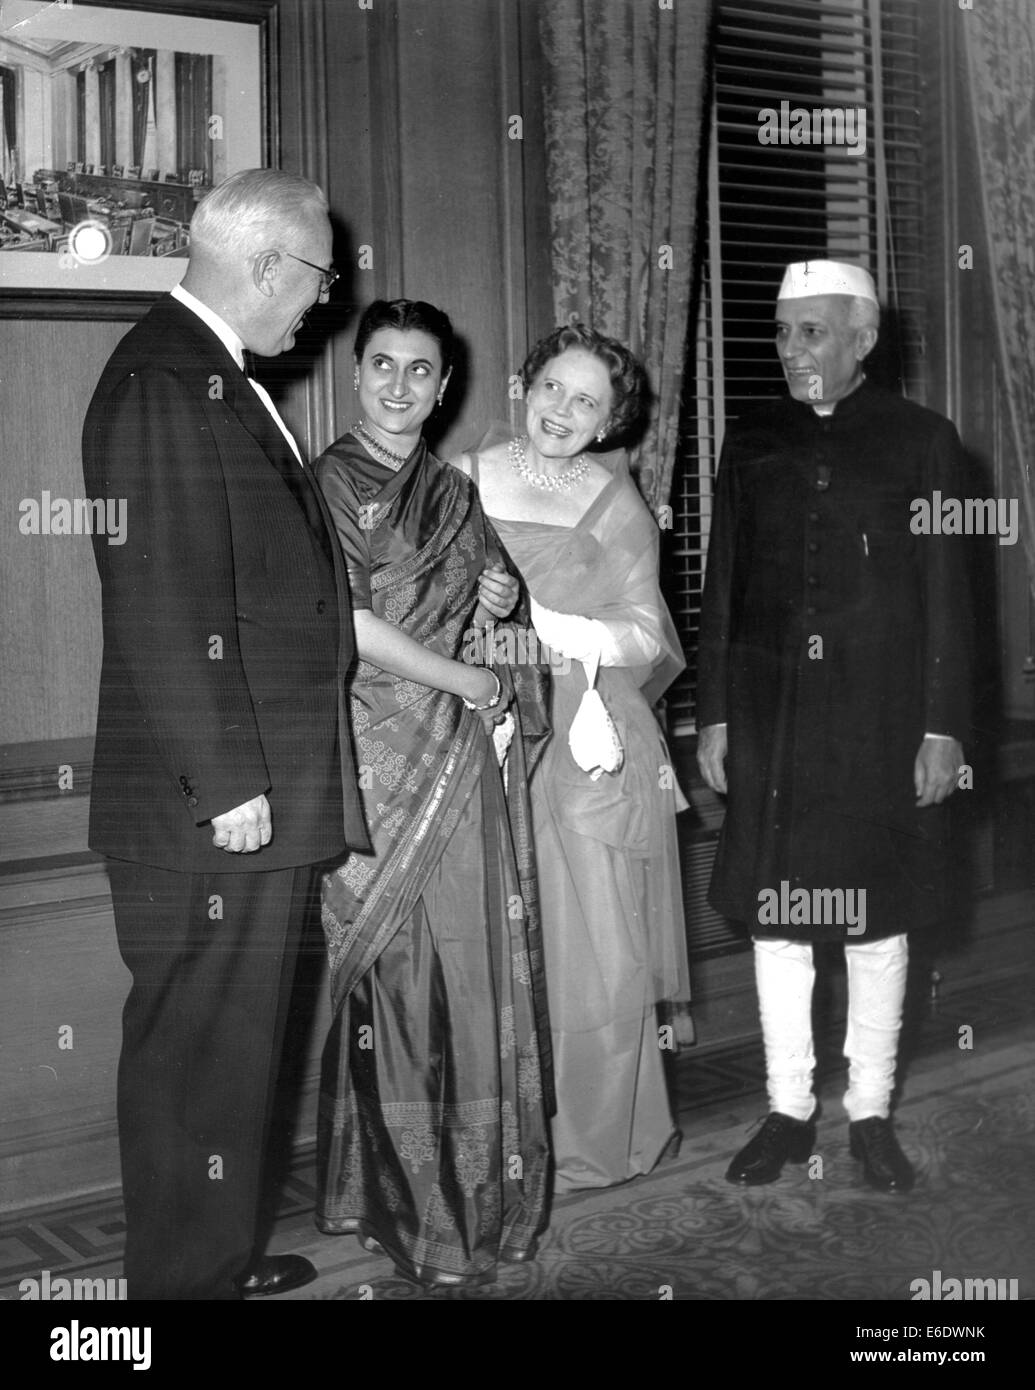 Jan 20, 1966 - Washington, District of Columbia, U.S. - India's first and to date only female prime minister INDIRA GANDHI made strides in modernizing India but never quelled its political turmoil. In 1971, Gandhi provided military support for the secession of East Bengal from Pakistan, creating Bangladesh. She won the election of 1972 in a landslide, but courts later upheld charges of election fraud in 1975. Gandhi responded by jailing her opponents and suspending civil liberties. In 1977, she was toppled from power, later regaining her post as prime minister in 1980. After quashing a Sikh up Stock Photo